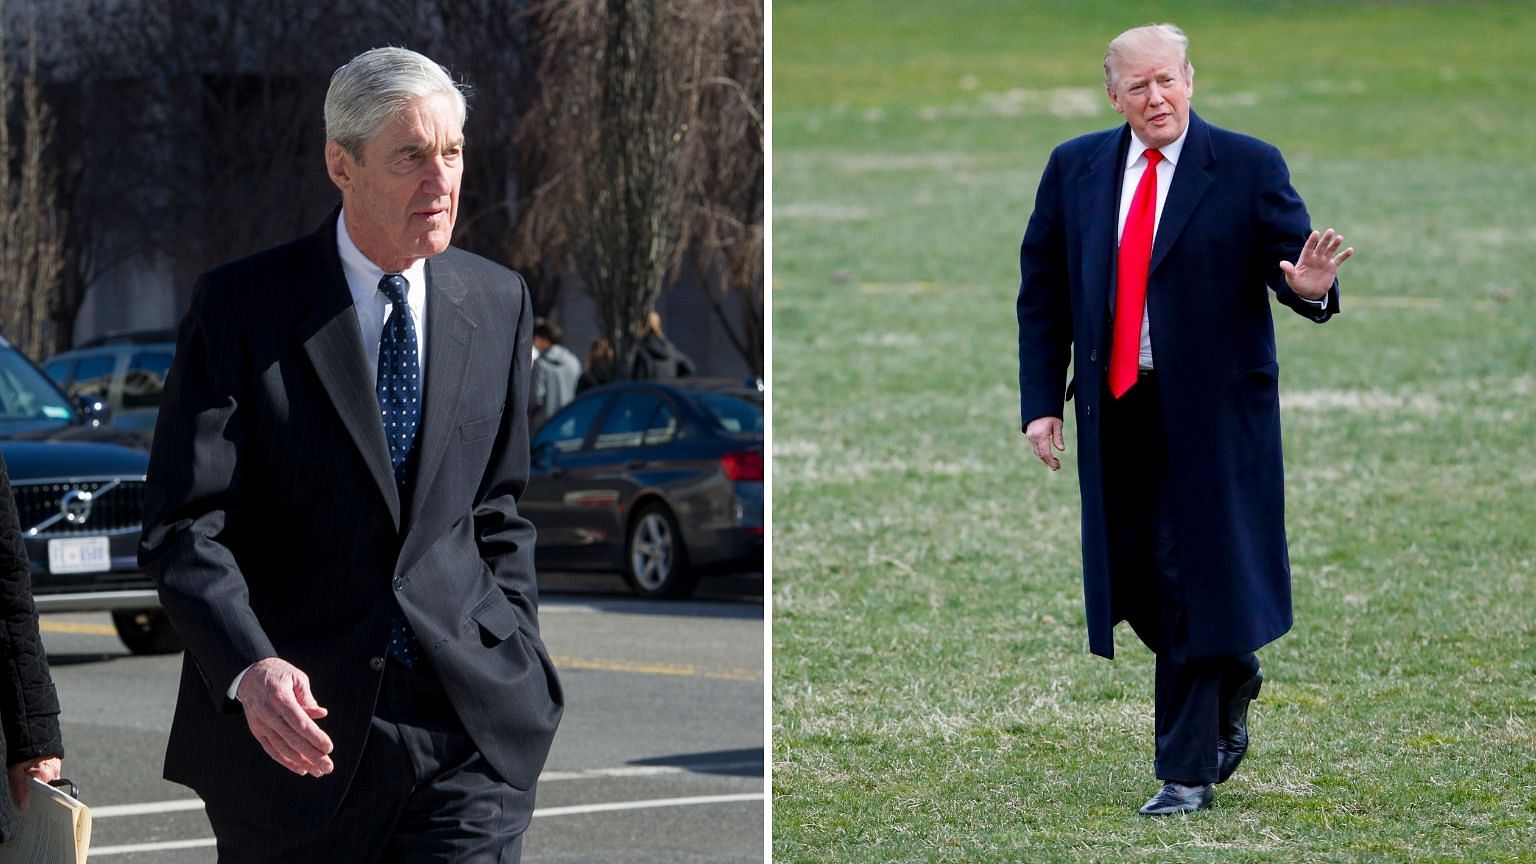 Special Counsel Robert Mueller and US President Donald Trump. The results of Mueller’s investigation found no collusion between Trump and Russia for the 2016 election.